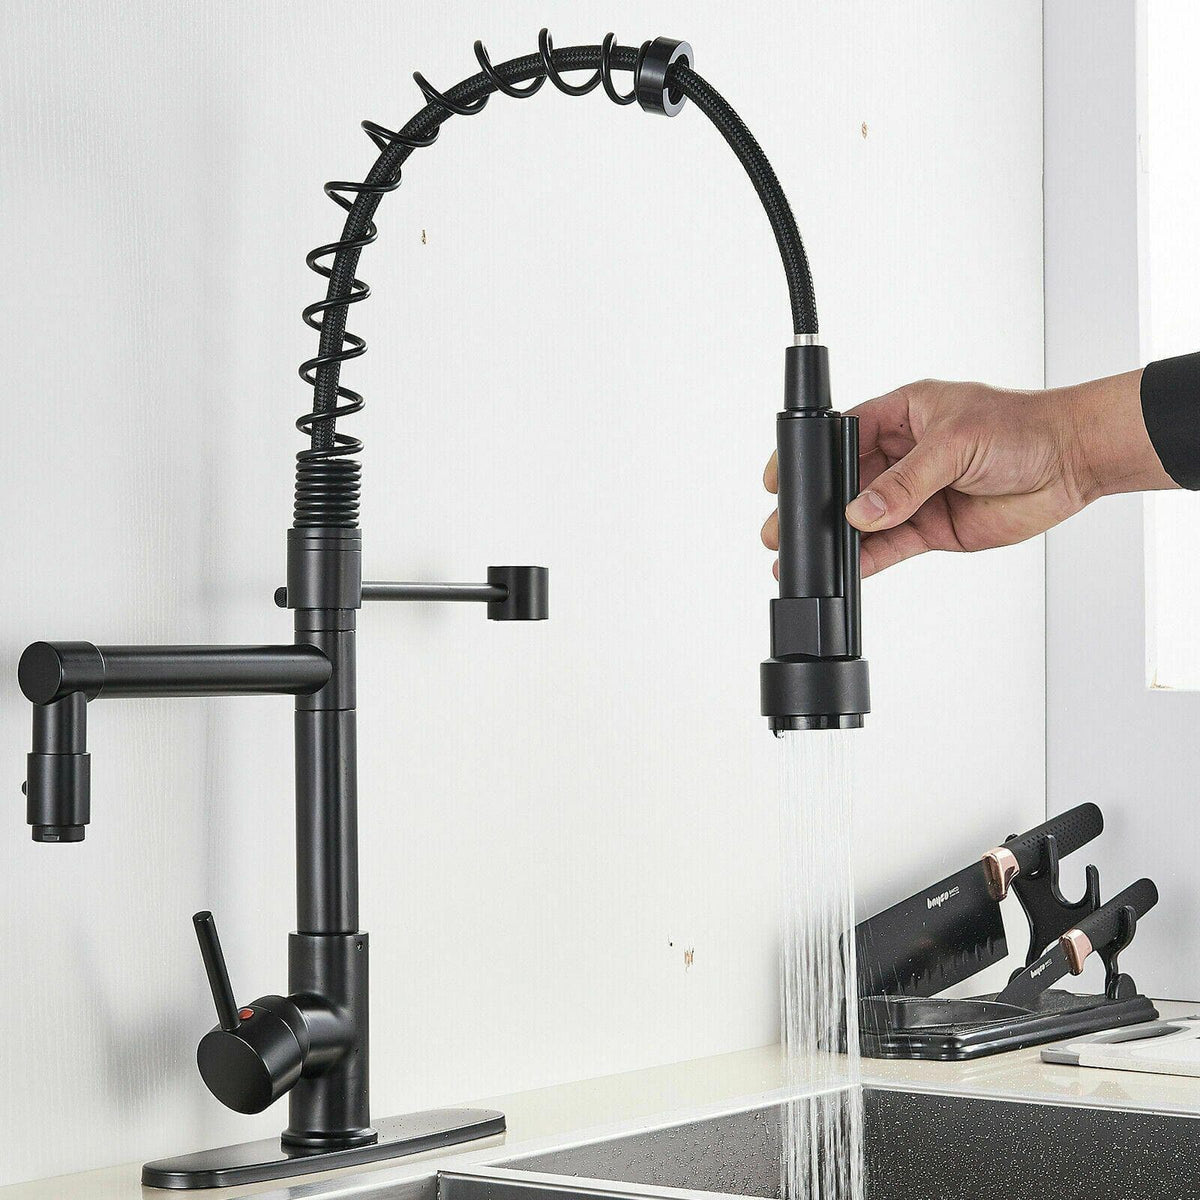 Solid Brass Kitchen Sink Faucet: Cold Water Mixer Basin Tap